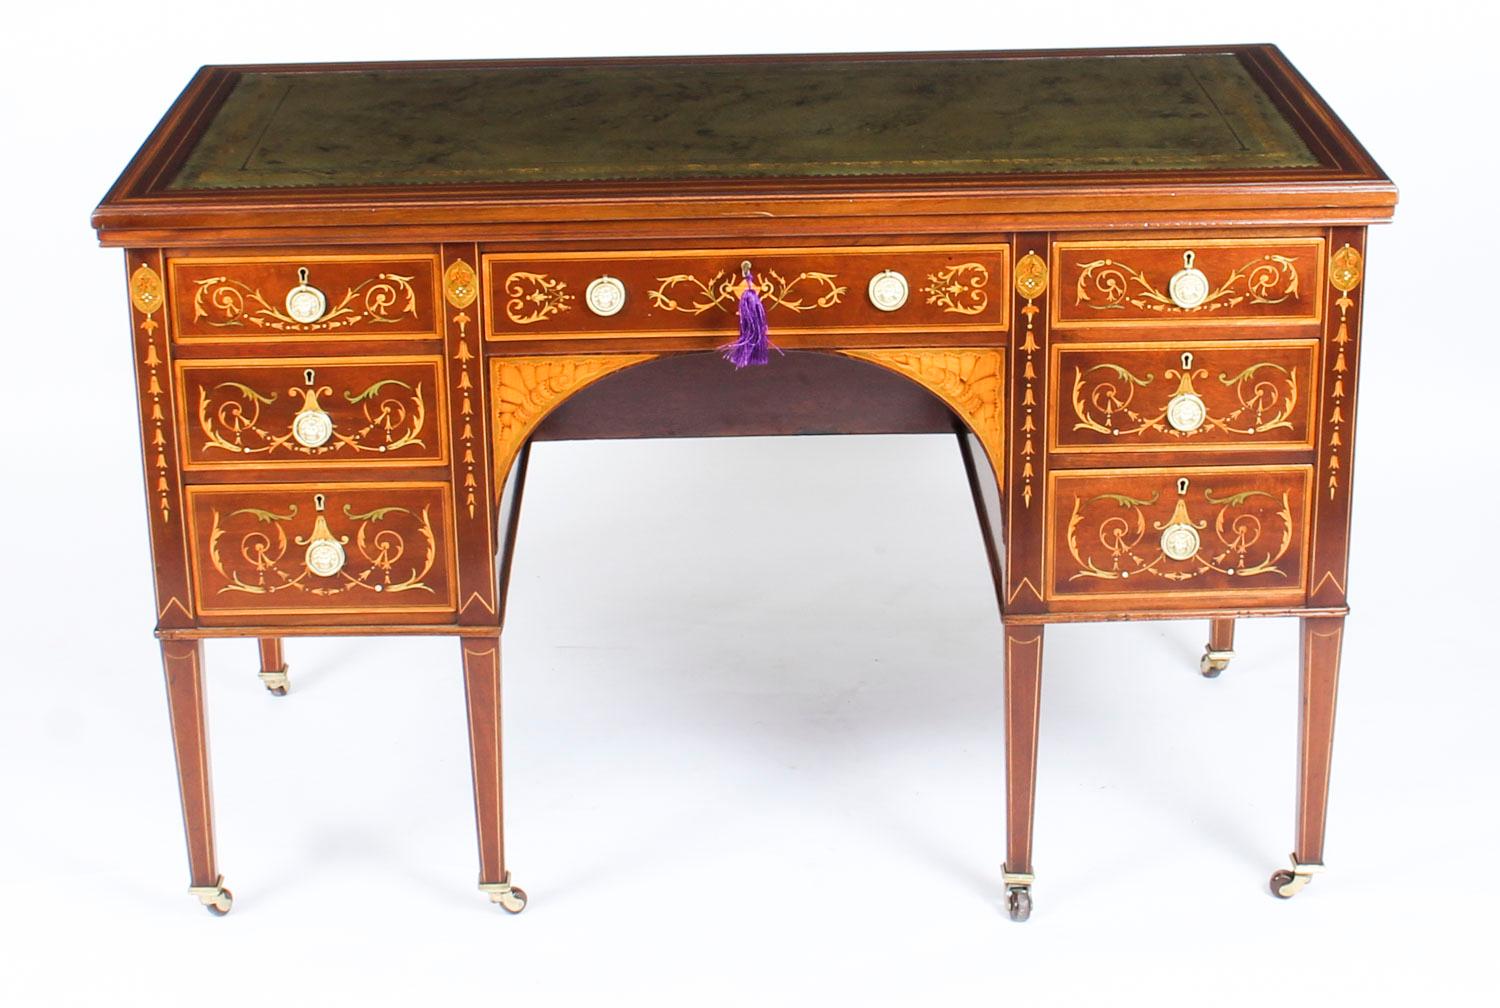 This is a stunning antique Edwardian writing desk, circa 1890 in date and in the manner of the renowned retailer and cabinet maker Edwards & Roberts.

It has a fabulous inset gold tooled green leather writing surface and is made of solid mahogany